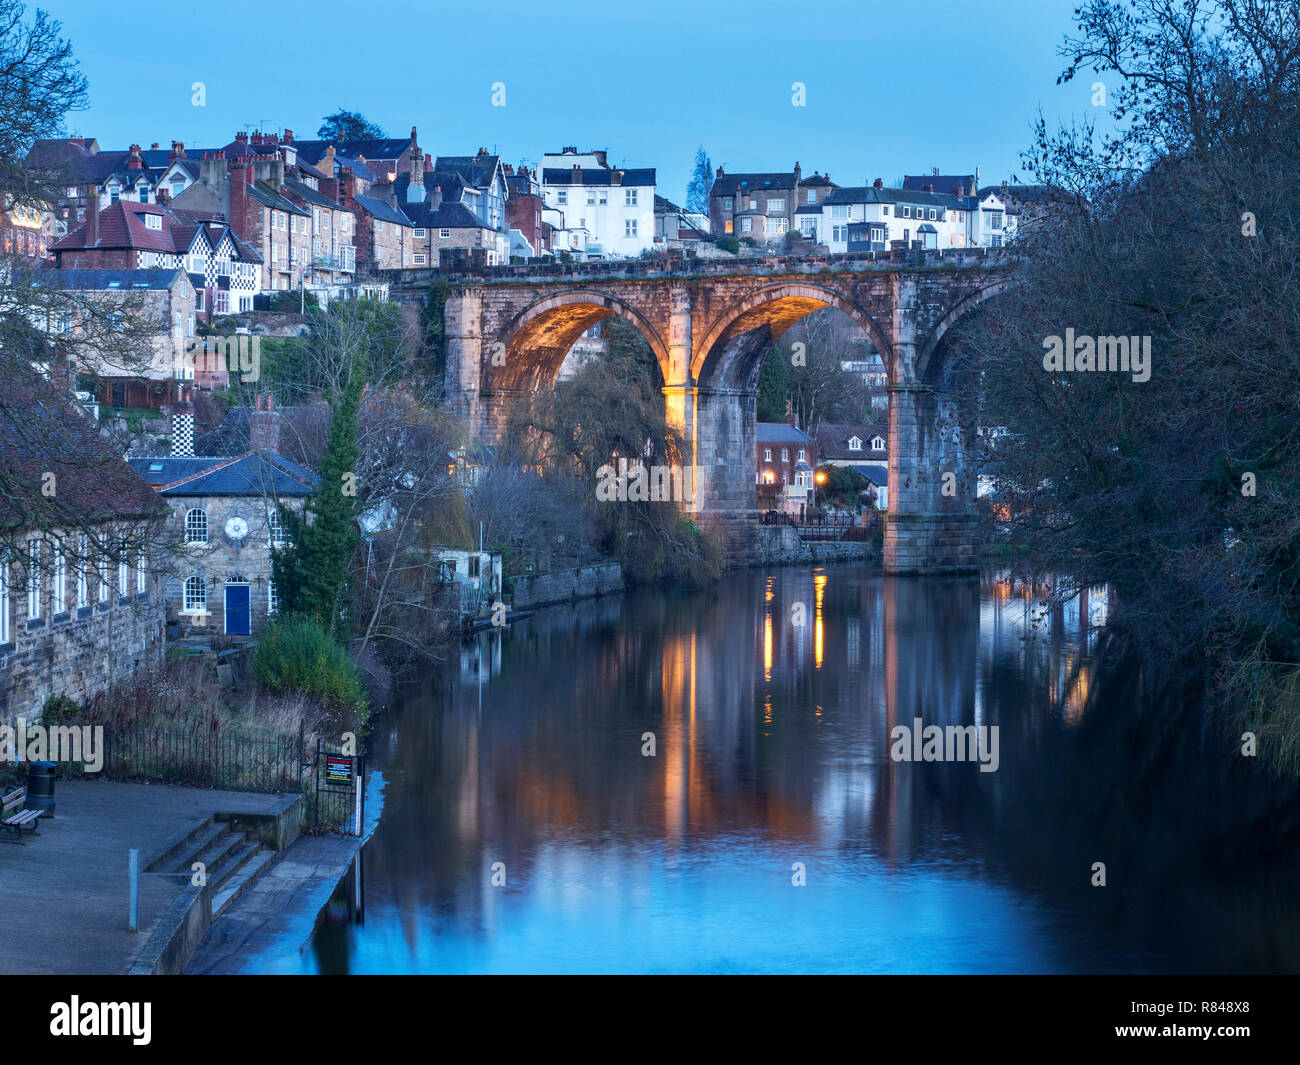 Railway viaduct over the River Nidd at dusk in Knaresborough North Yorkshire England Stock Photo